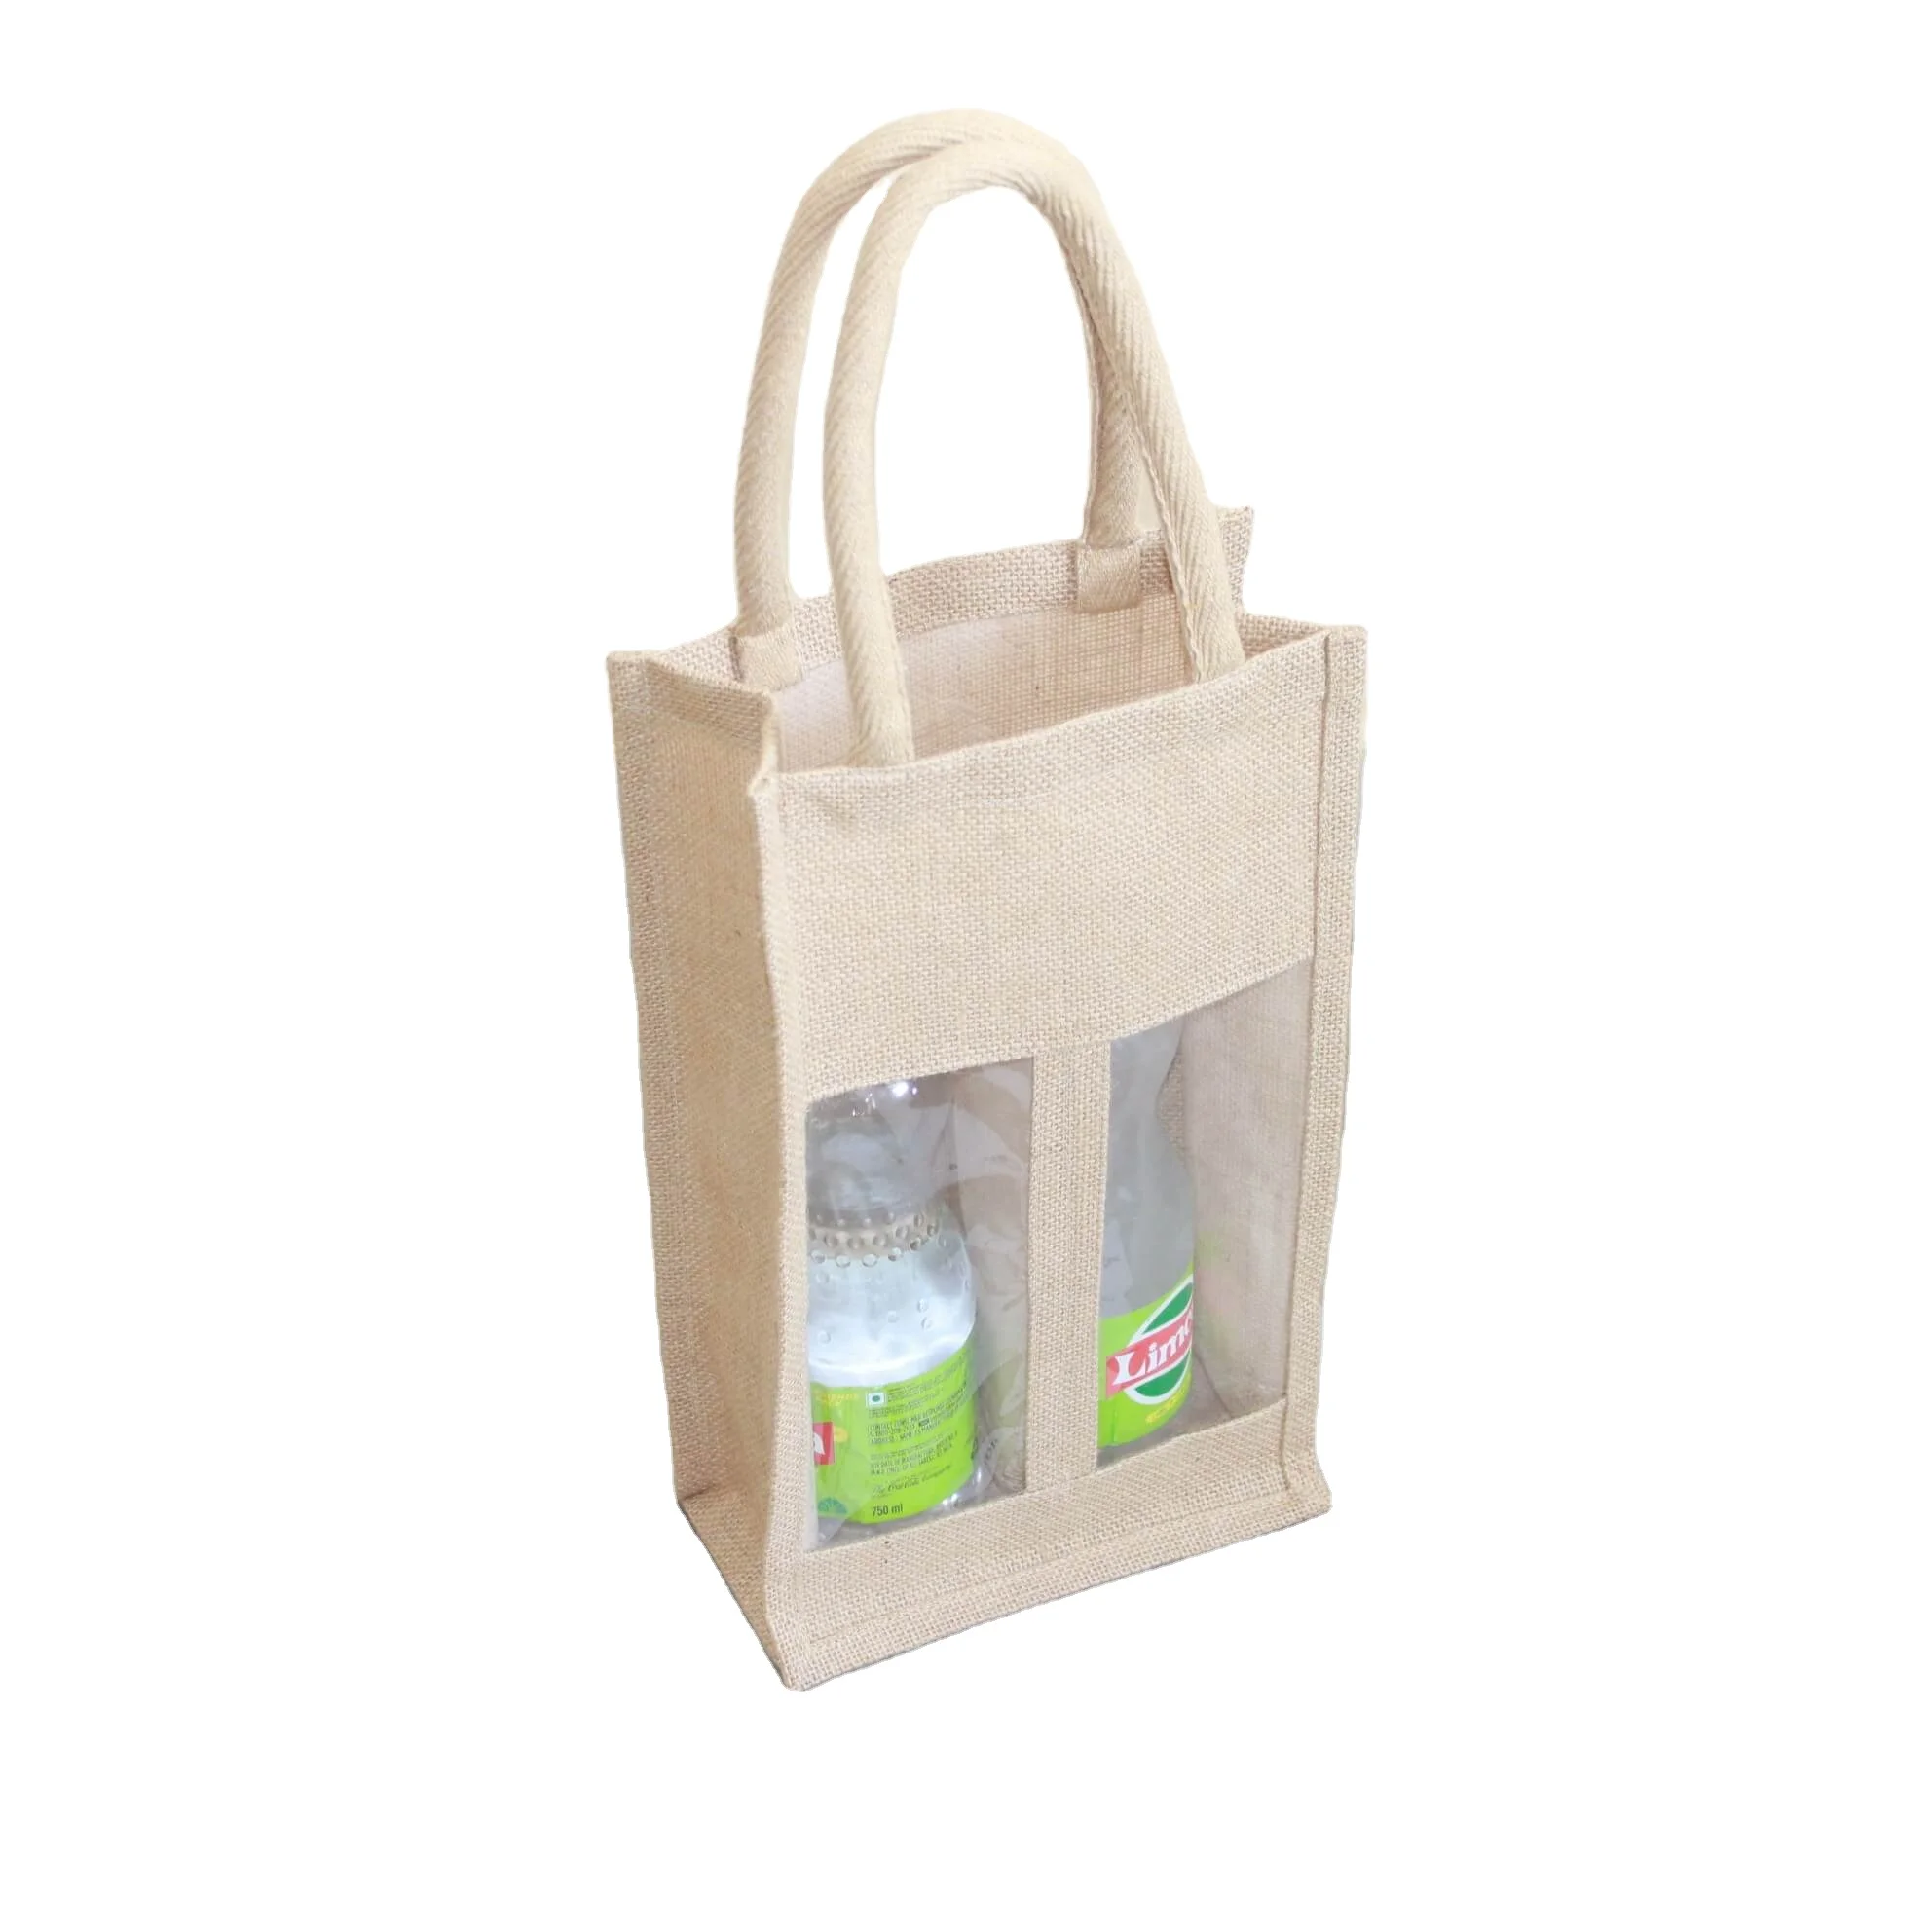 Two Bottle Wine Bag with front Transparent window main material used to construct the bag is JUTE